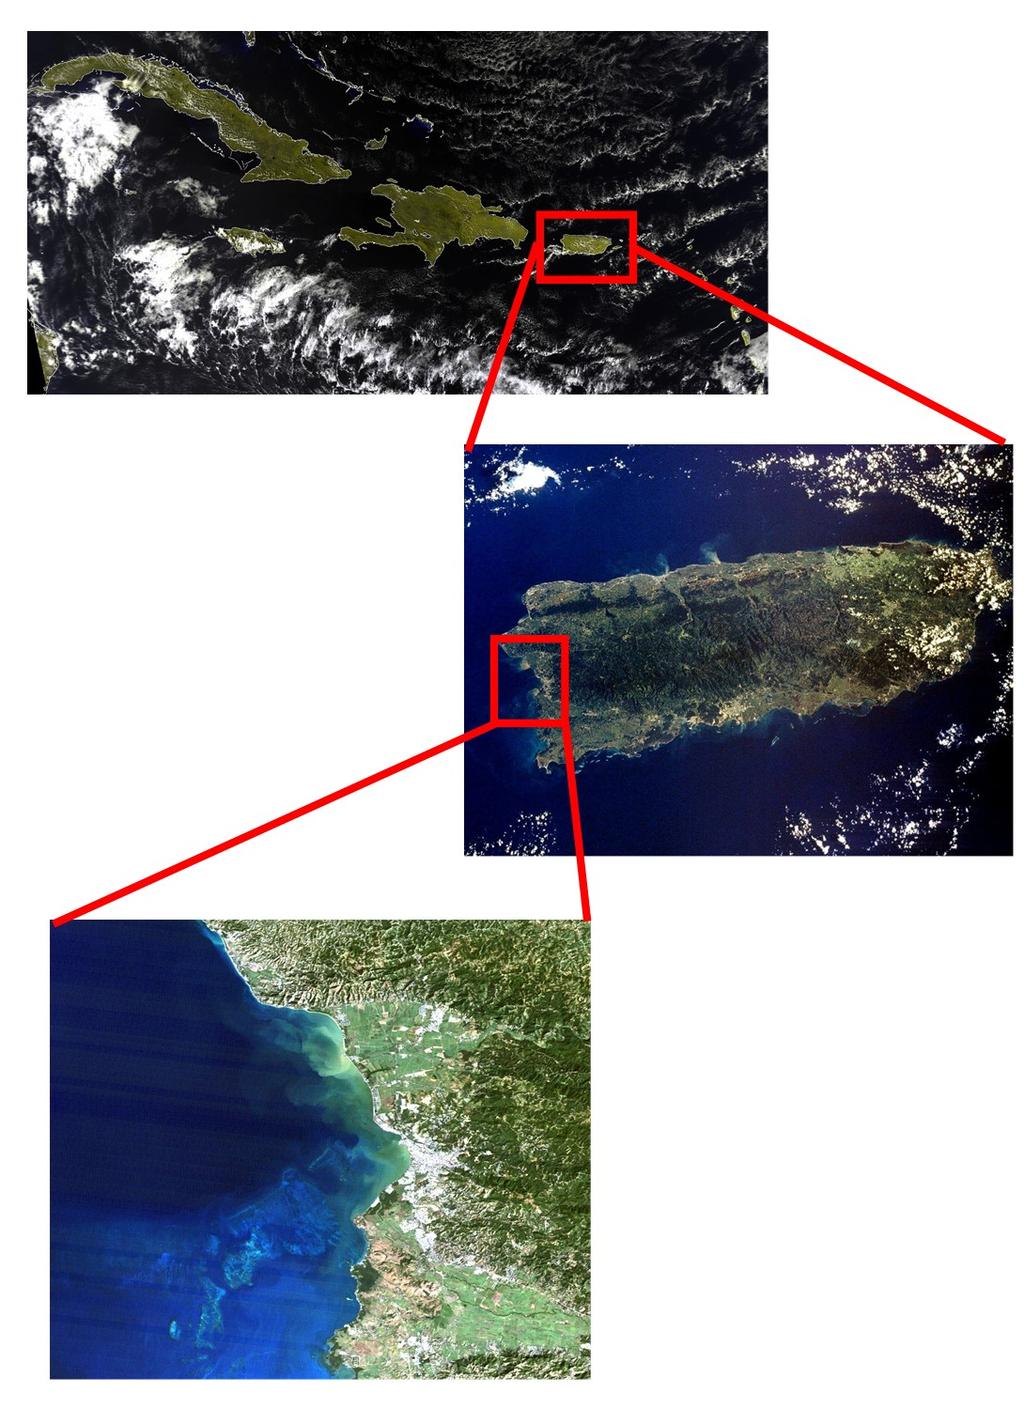 Figure 1: Location of study area: Mayagüez Bay, Puerto Rico (images provided by the GERS Laboratory) A previous undergraduate research was performed to estimate suspended sediments using remote